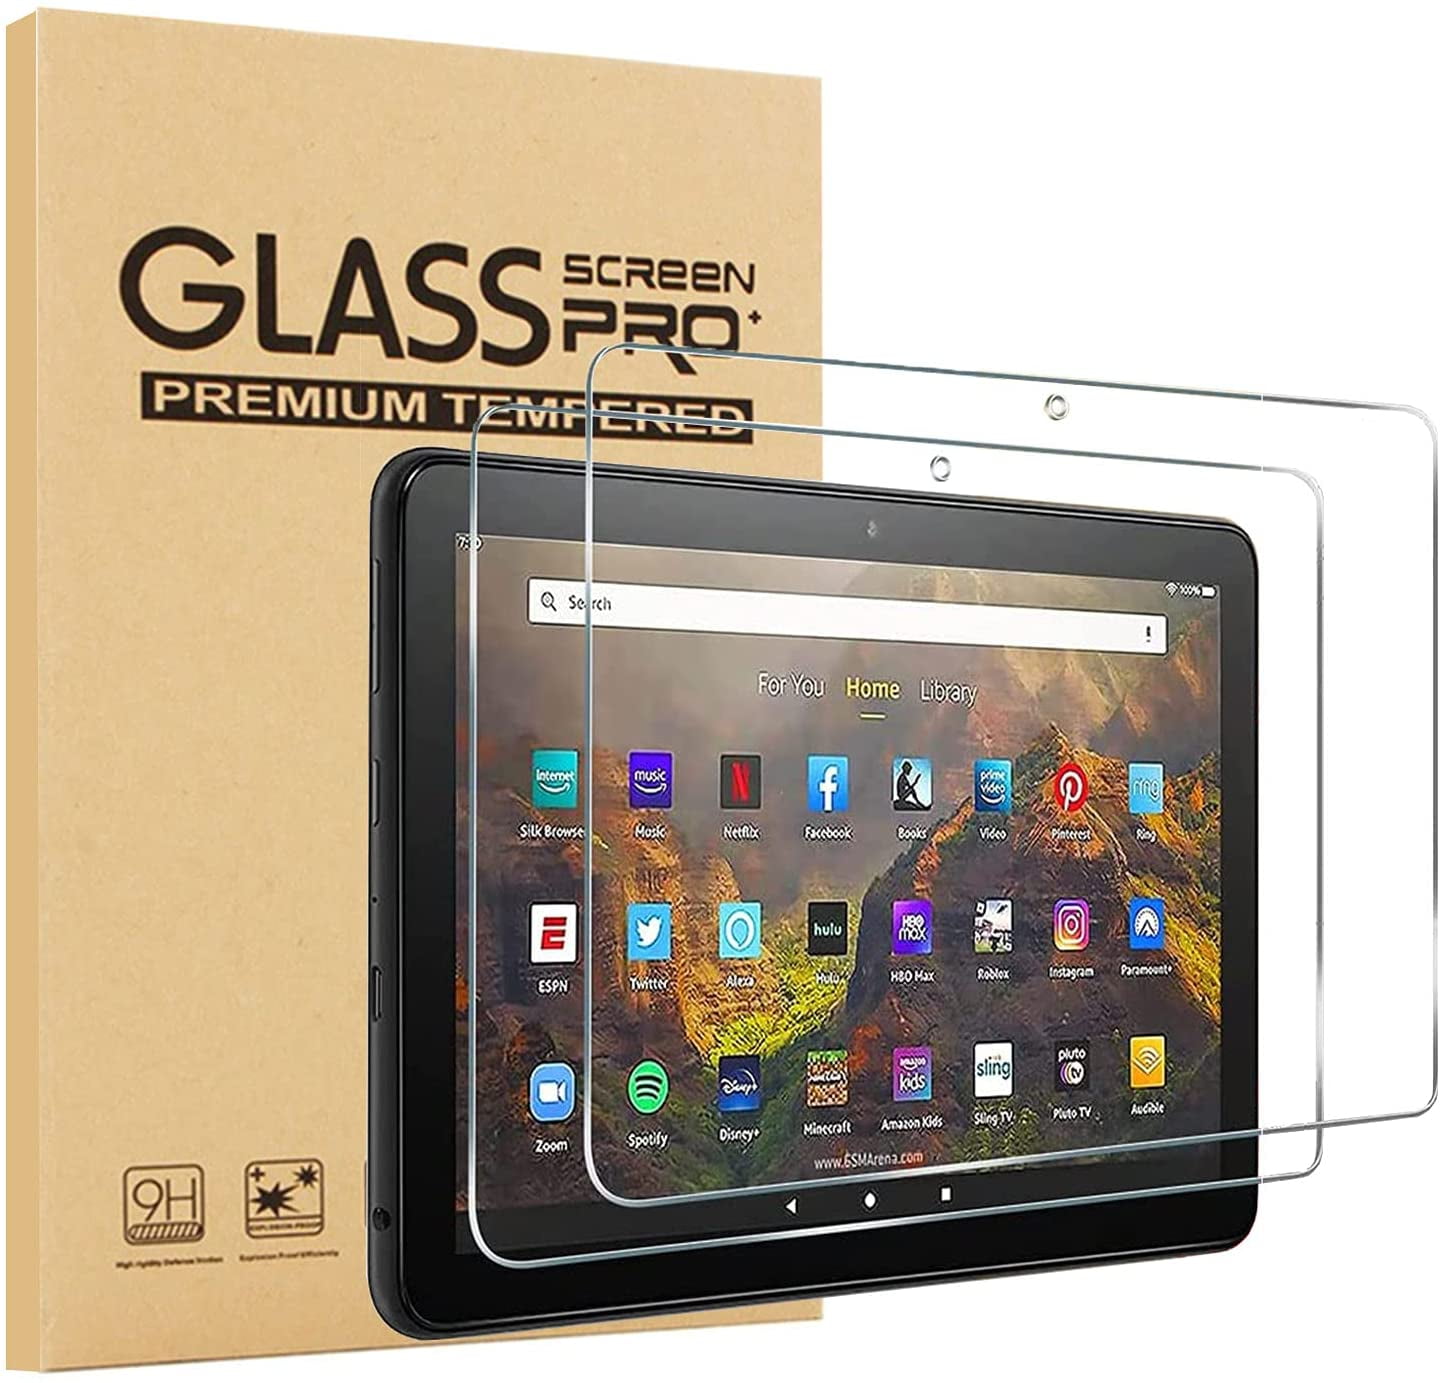 Premium Tempered Glass Film Screen Protector for Amazon Kindle Fire 7 HD 8 10 